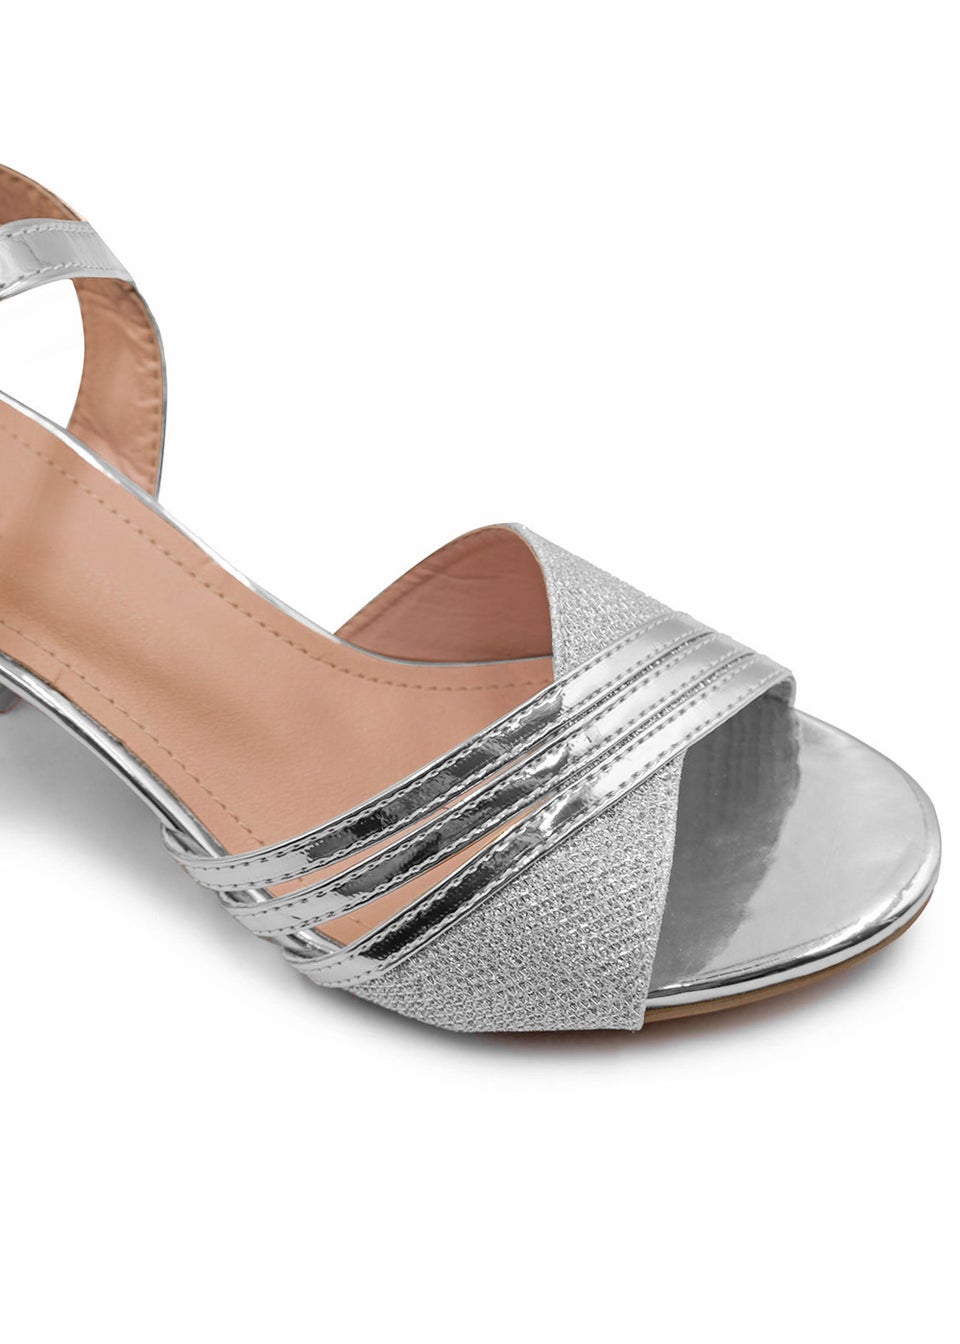 Where's That From Stormi Low Heel Sandals In Silver Glitter